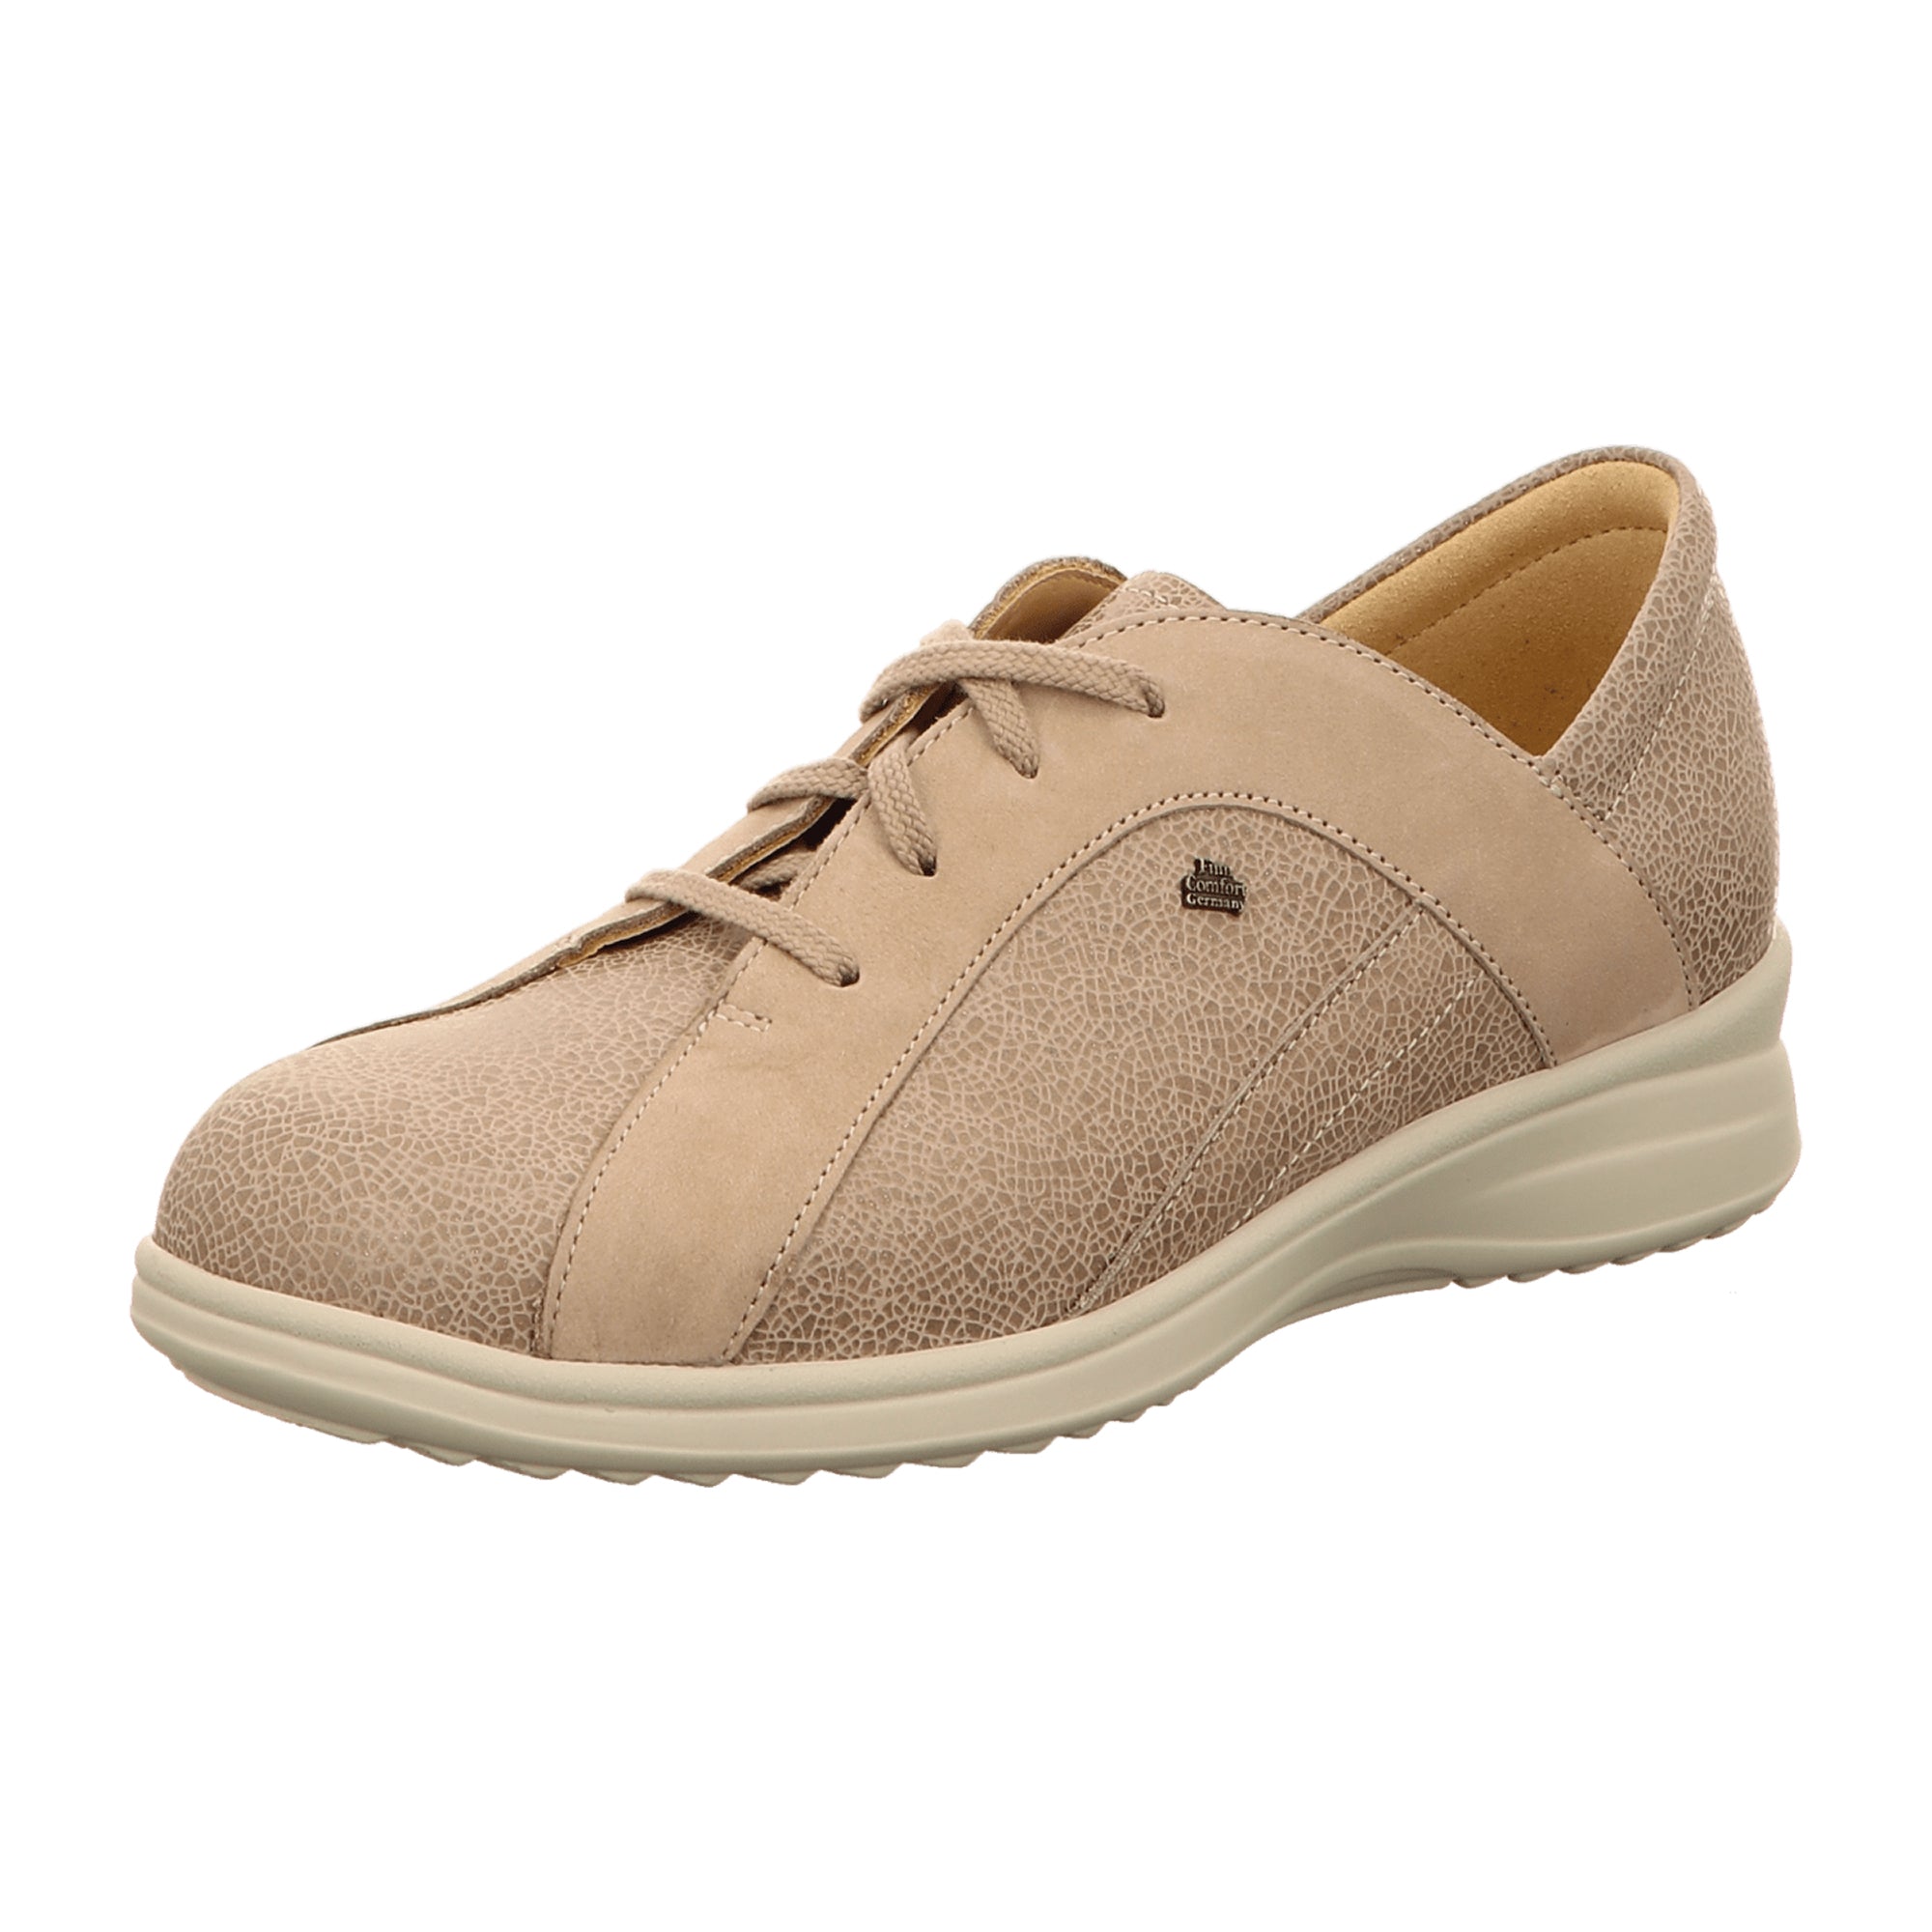 Finn Comfort Mineola Women's Comfort Shoes - Stylish Beige Walking Shoes for Young Adults